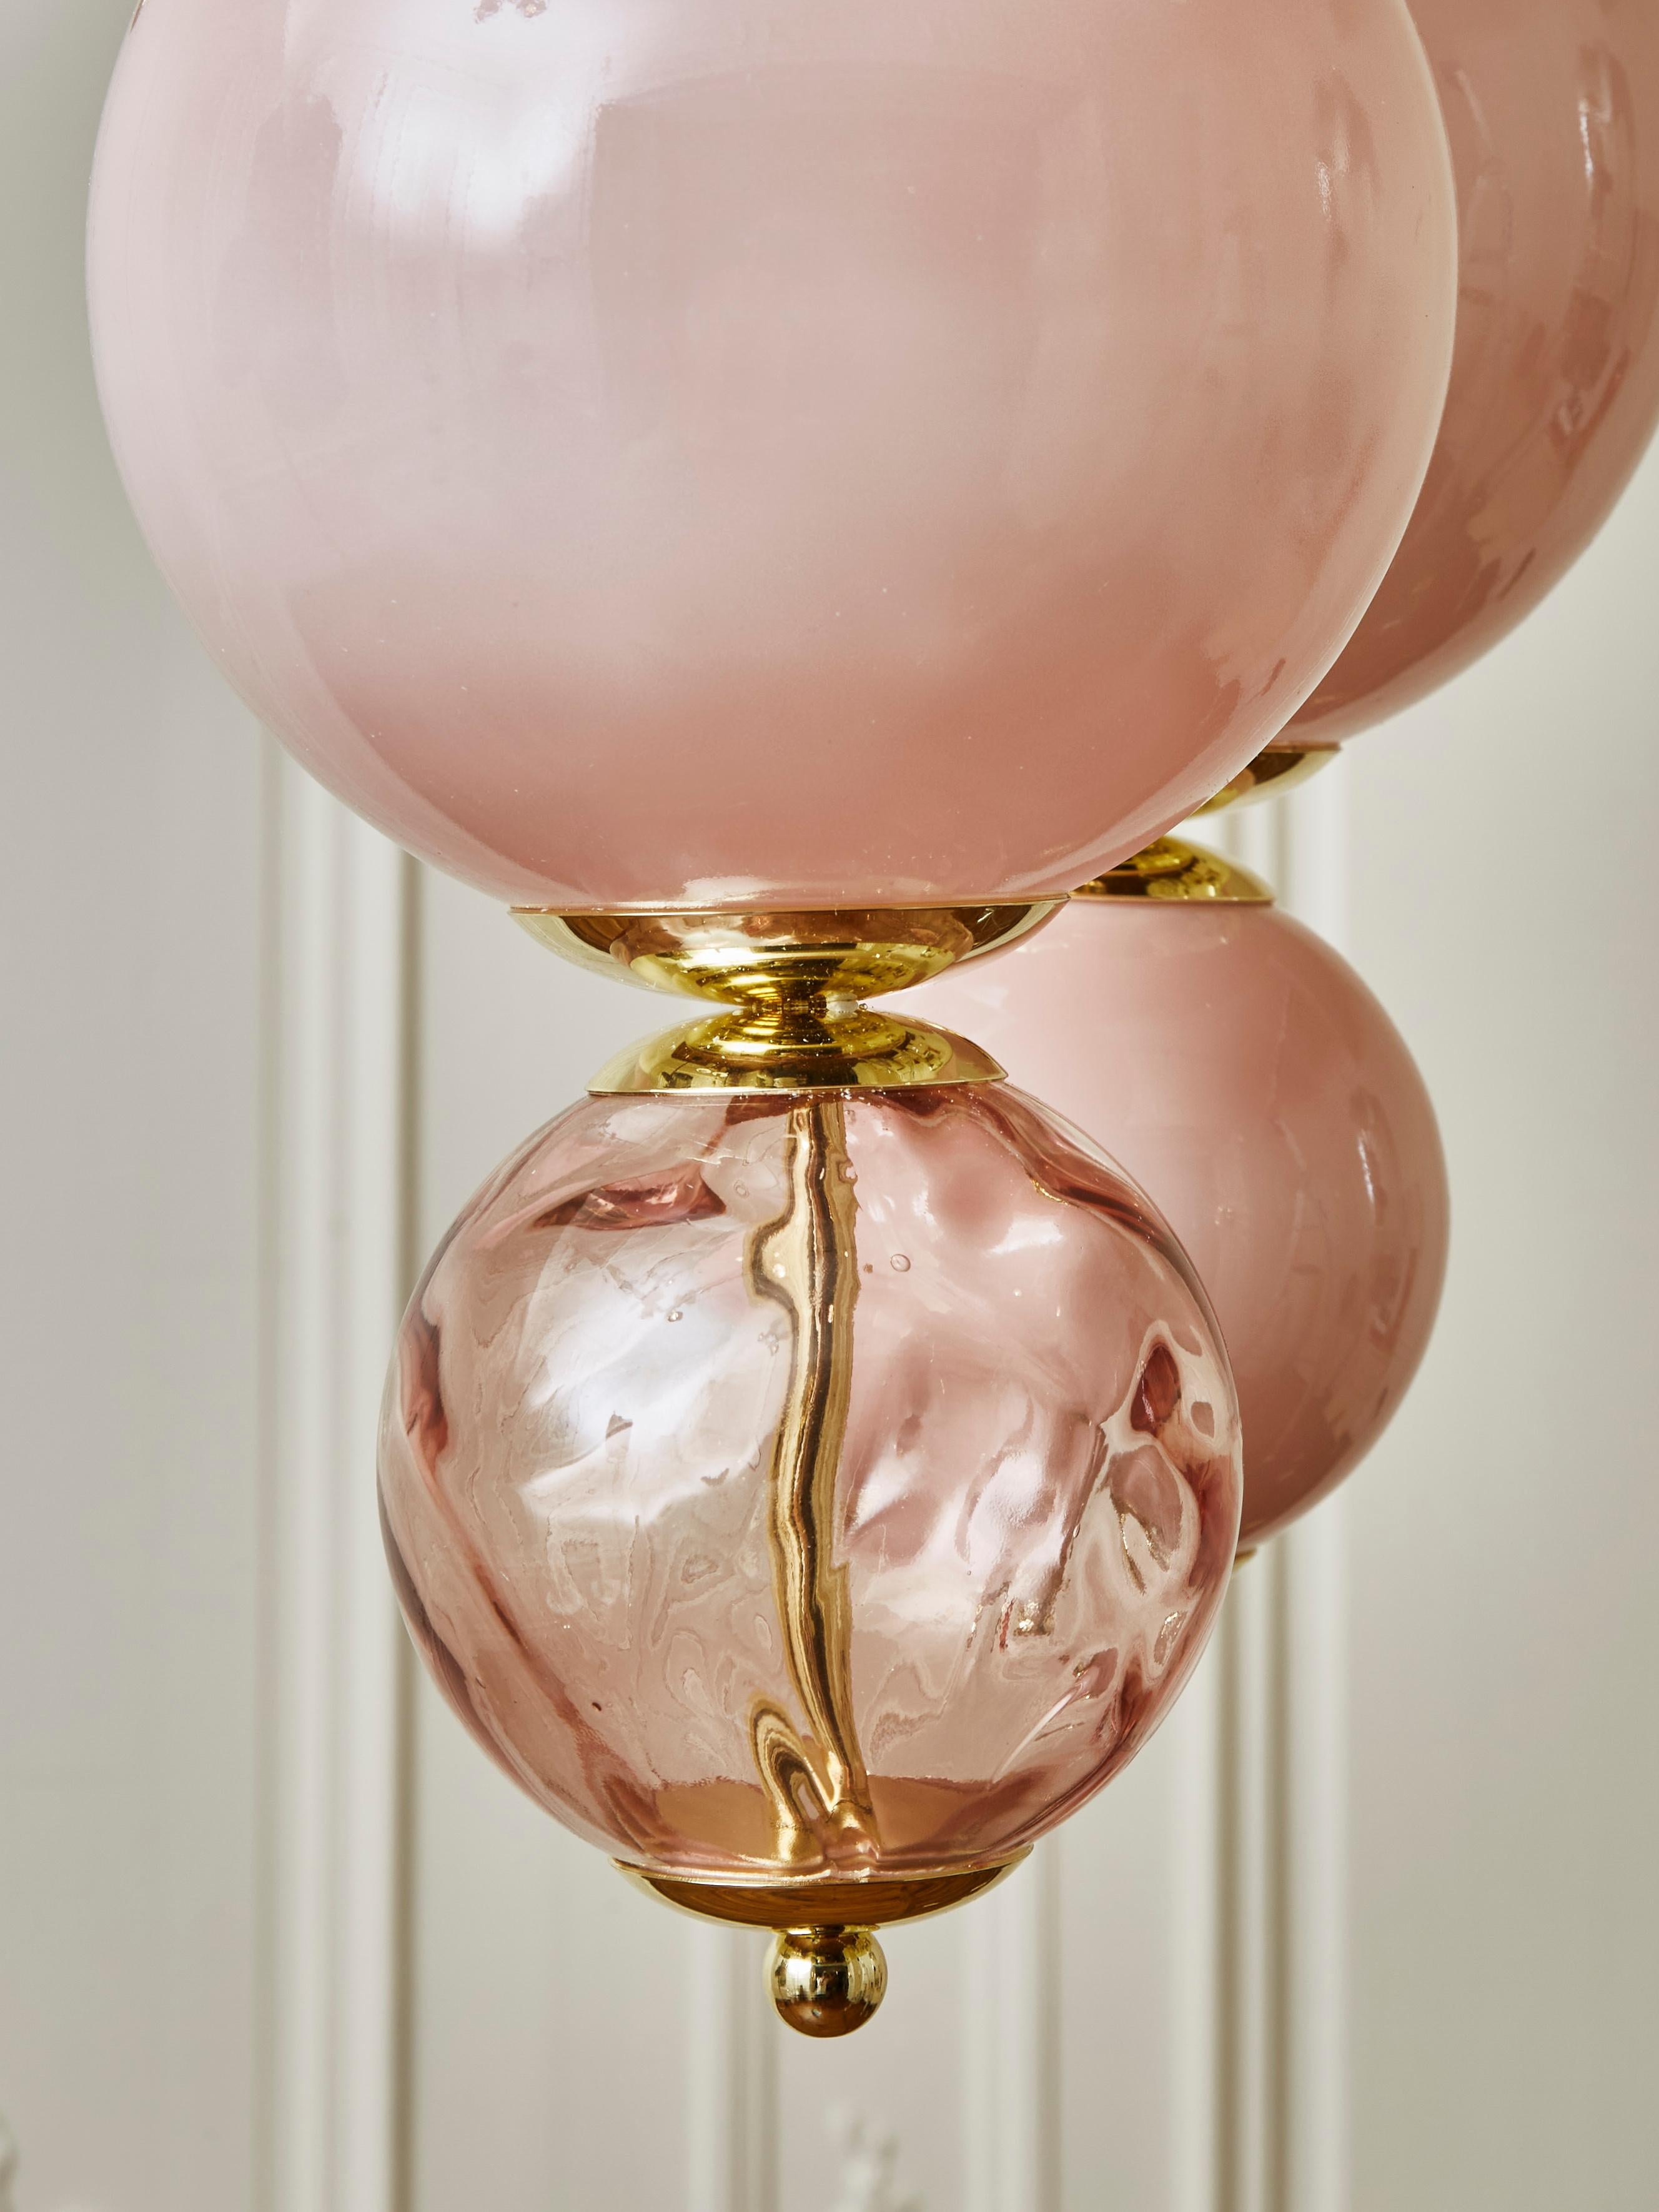 Superb suspensions in gilt metal, pink opaline glass and pink blown Murano glass globes.
Creation by Studio Glustin.